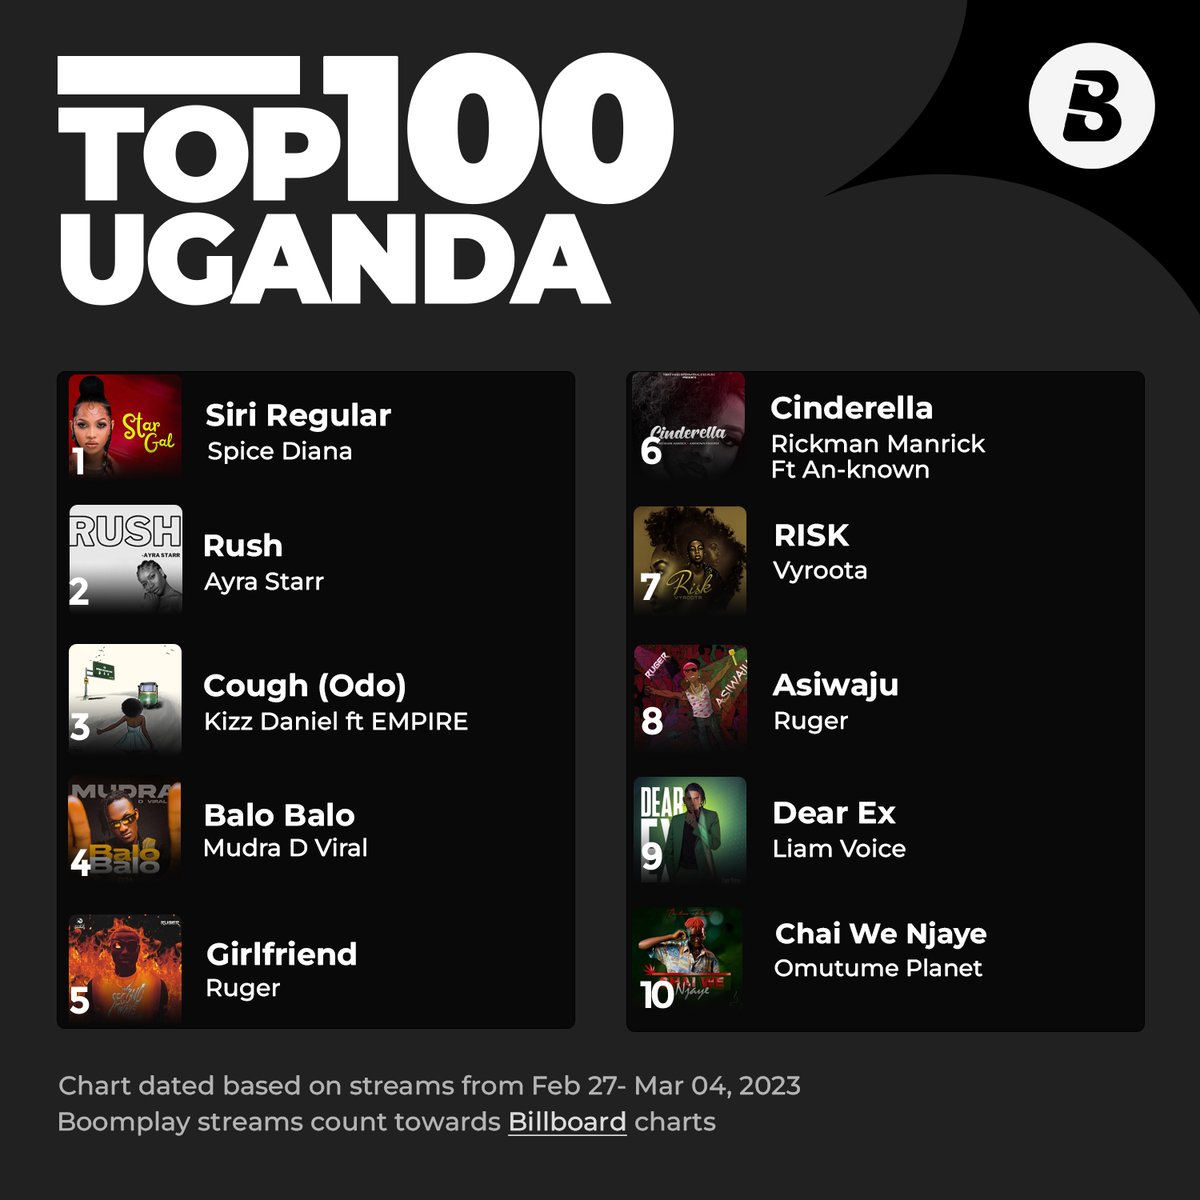 The #Top100 is now here... with fresh entries onto the top 10, thank you all for streaming. CC: @SpiceDianaUg @Mudradviral @RickmanManrick @AnknownProsper @vyroota @LiamVoiceboy @omutumeplanet